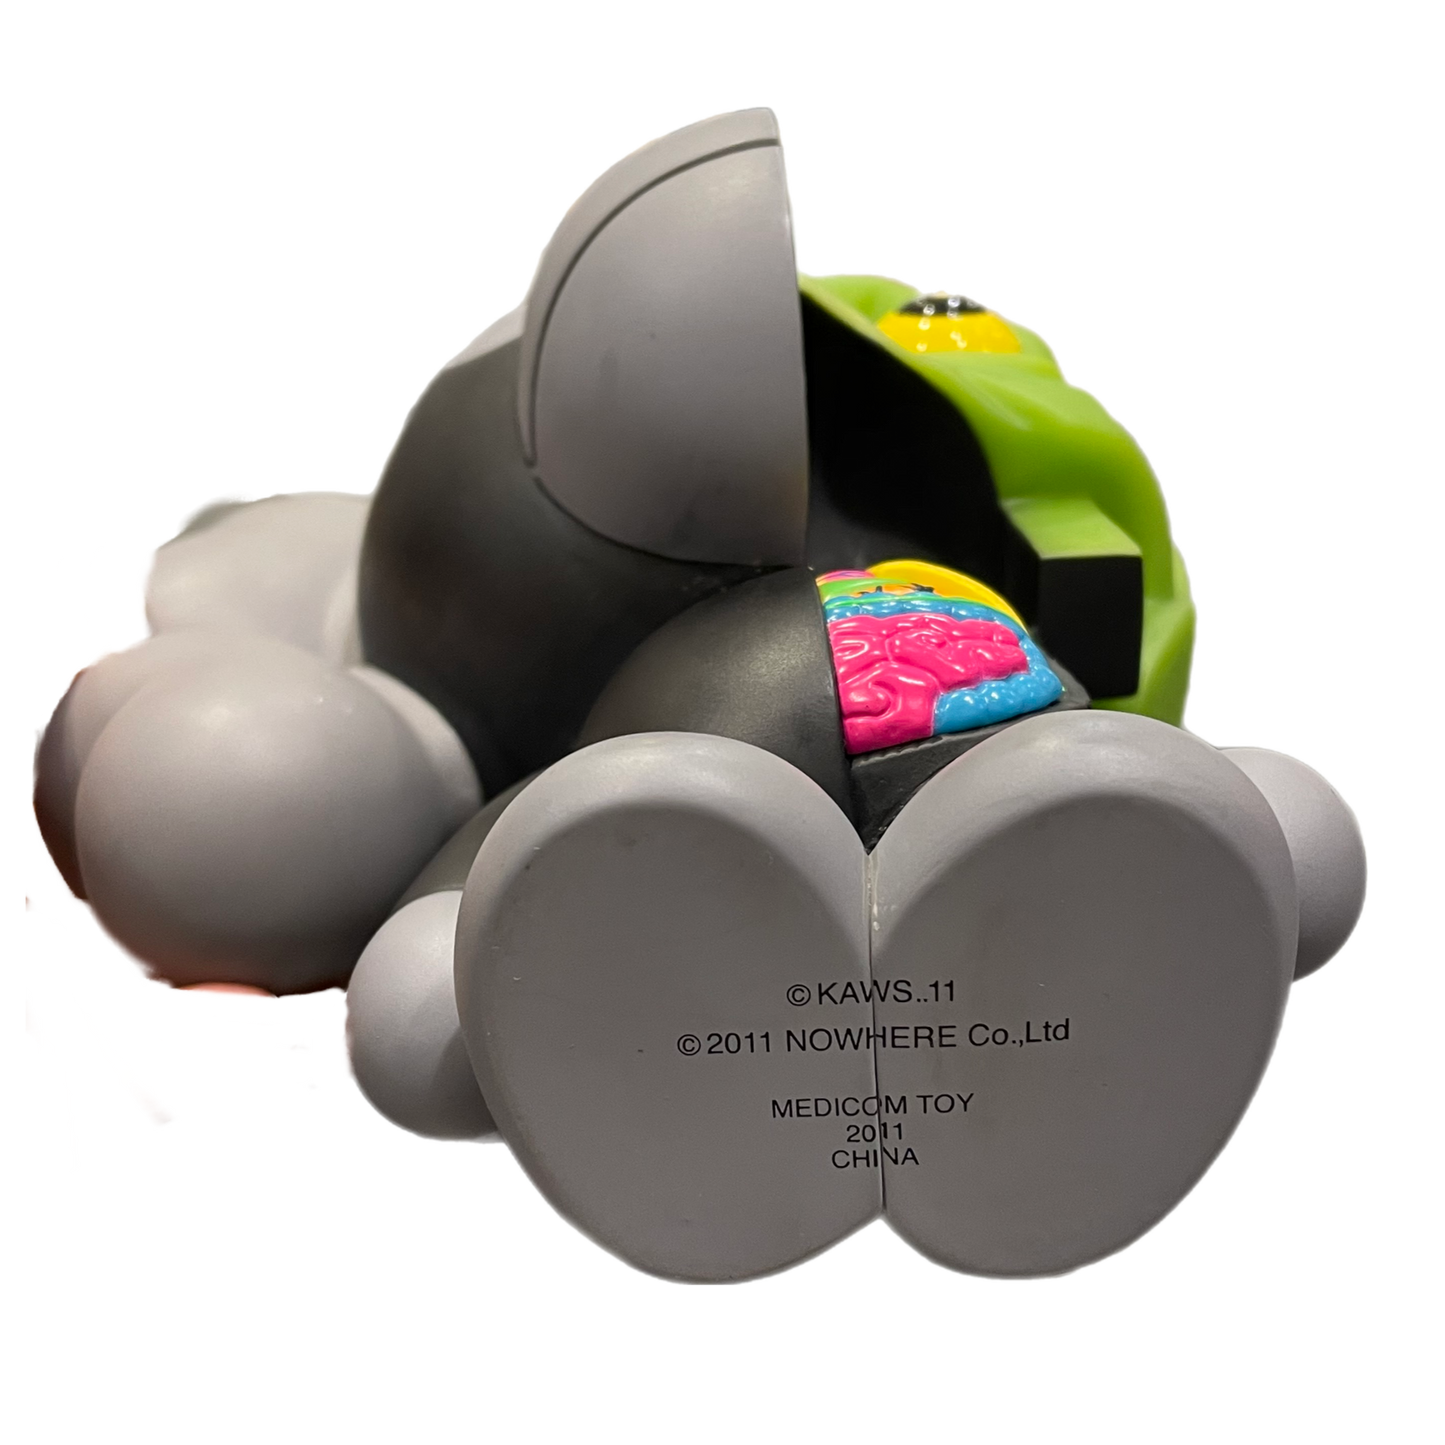 Kaws - "Bare Dissected Baby Milo" - Accessories